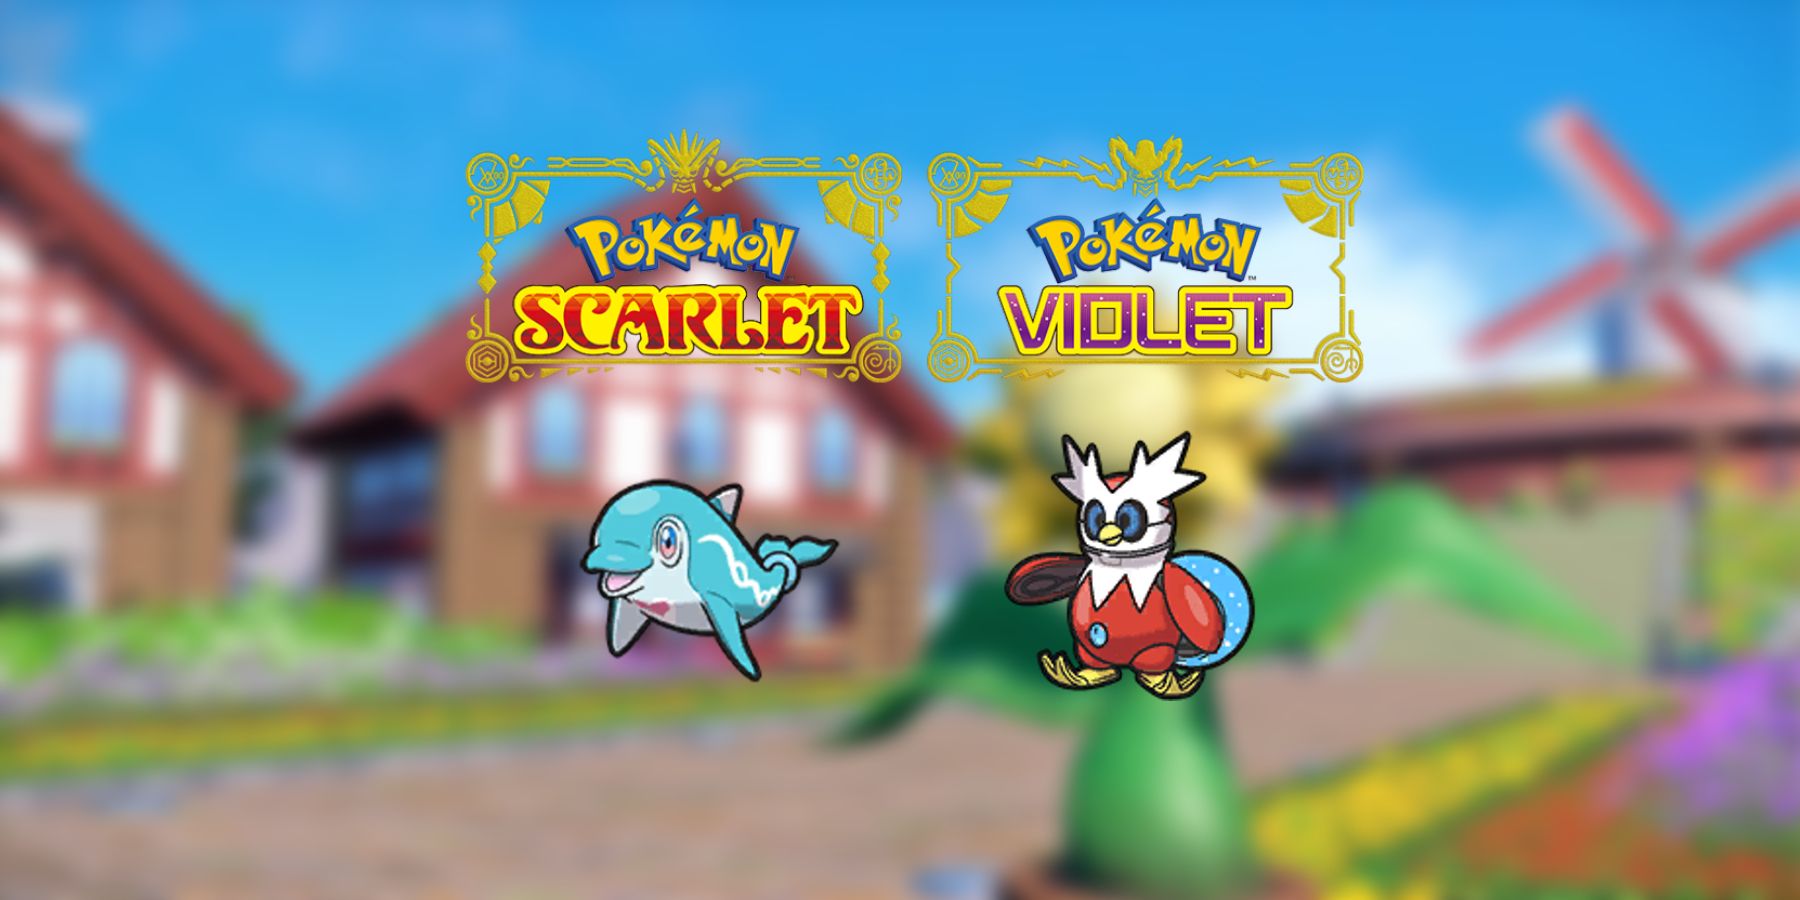 Our Team of the Week is an OU rain - Smogon University